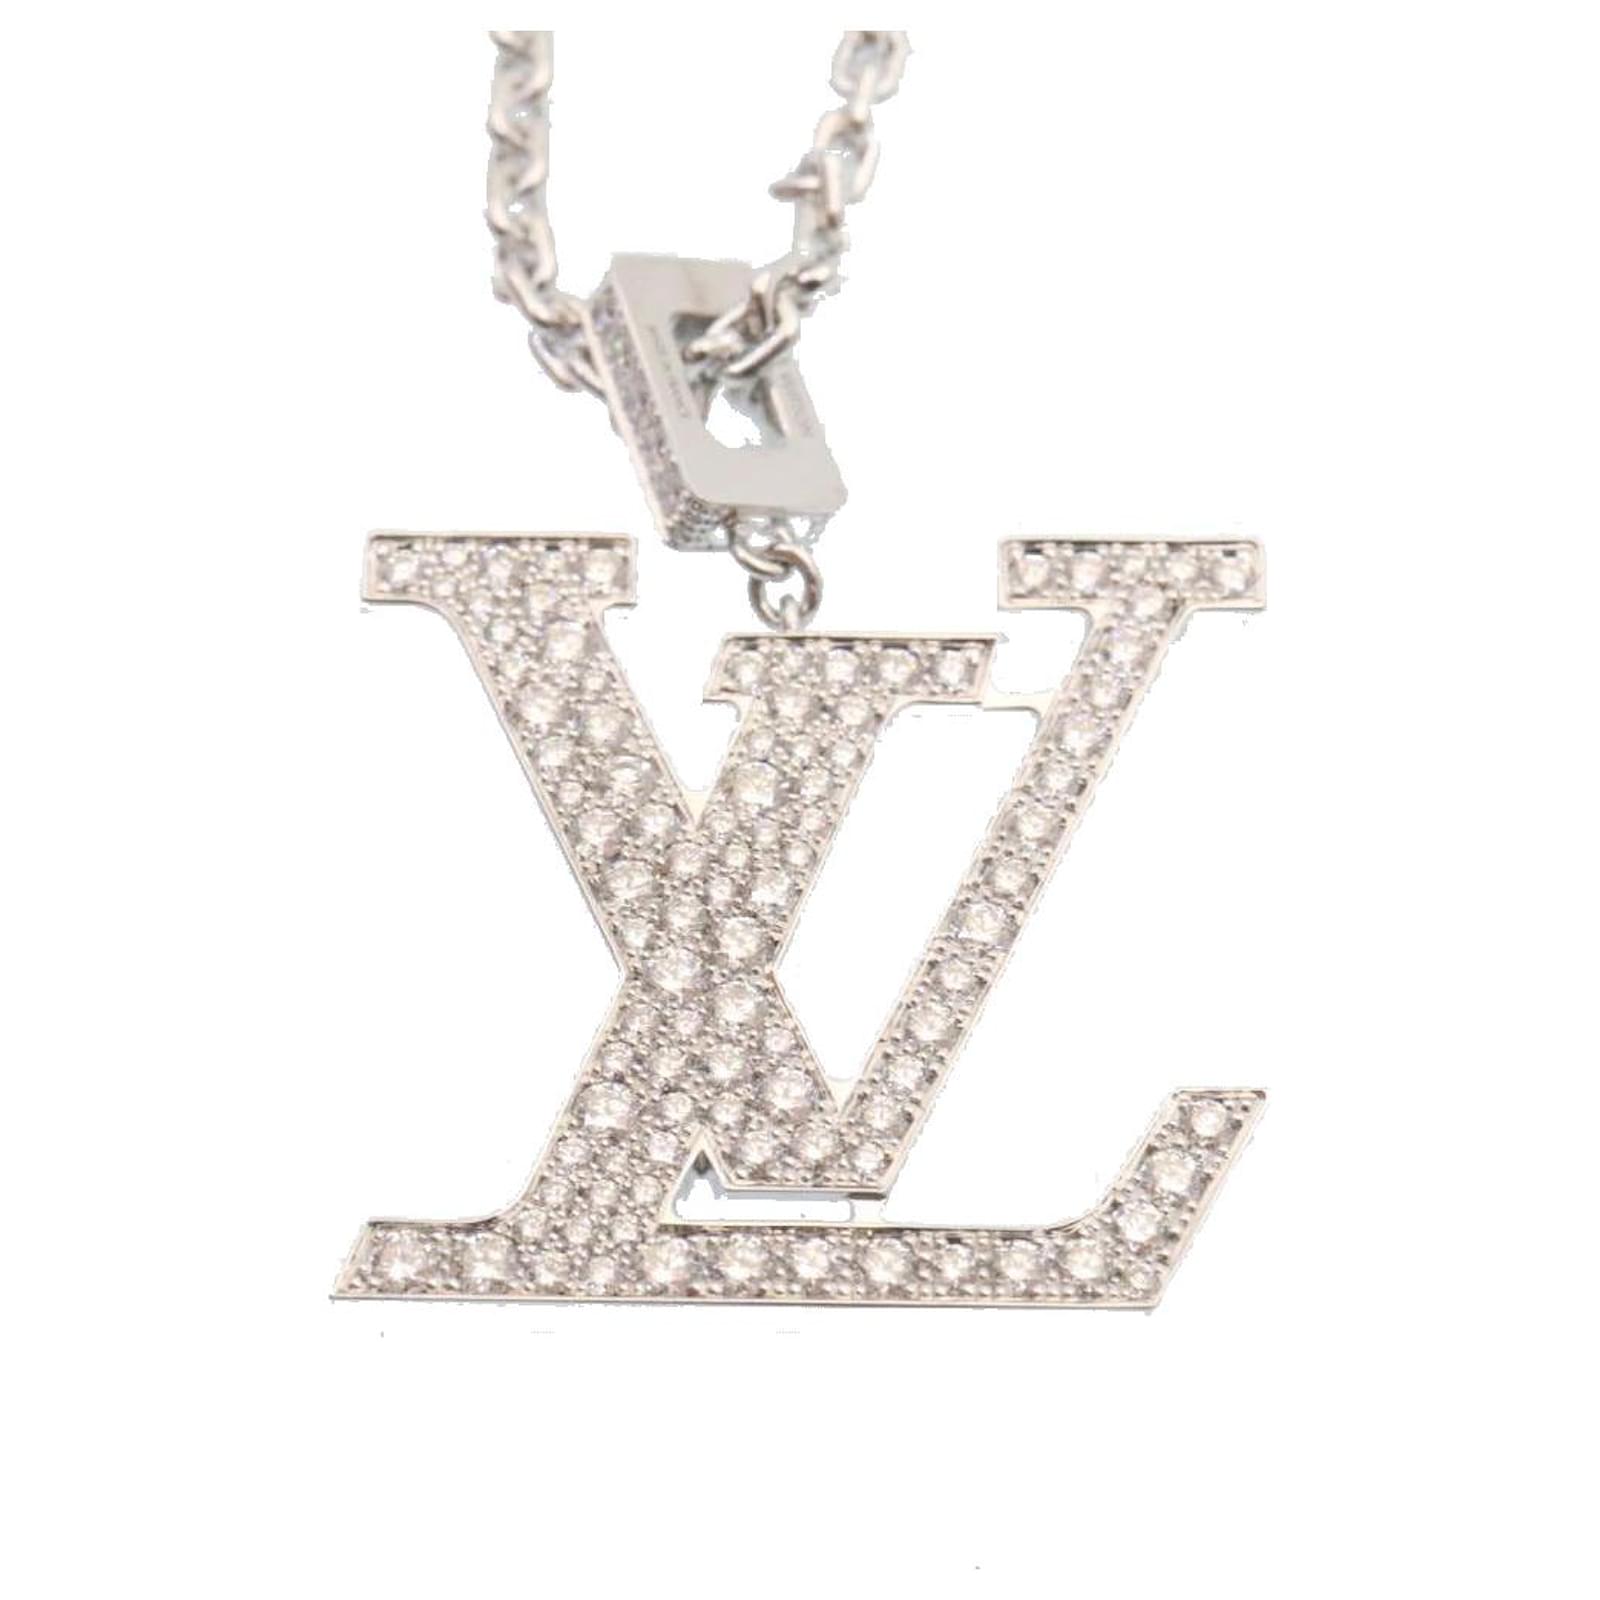 Louis Vuitton Idylle Blossom Necklace in 18K Rose Gold 0.2 CTW